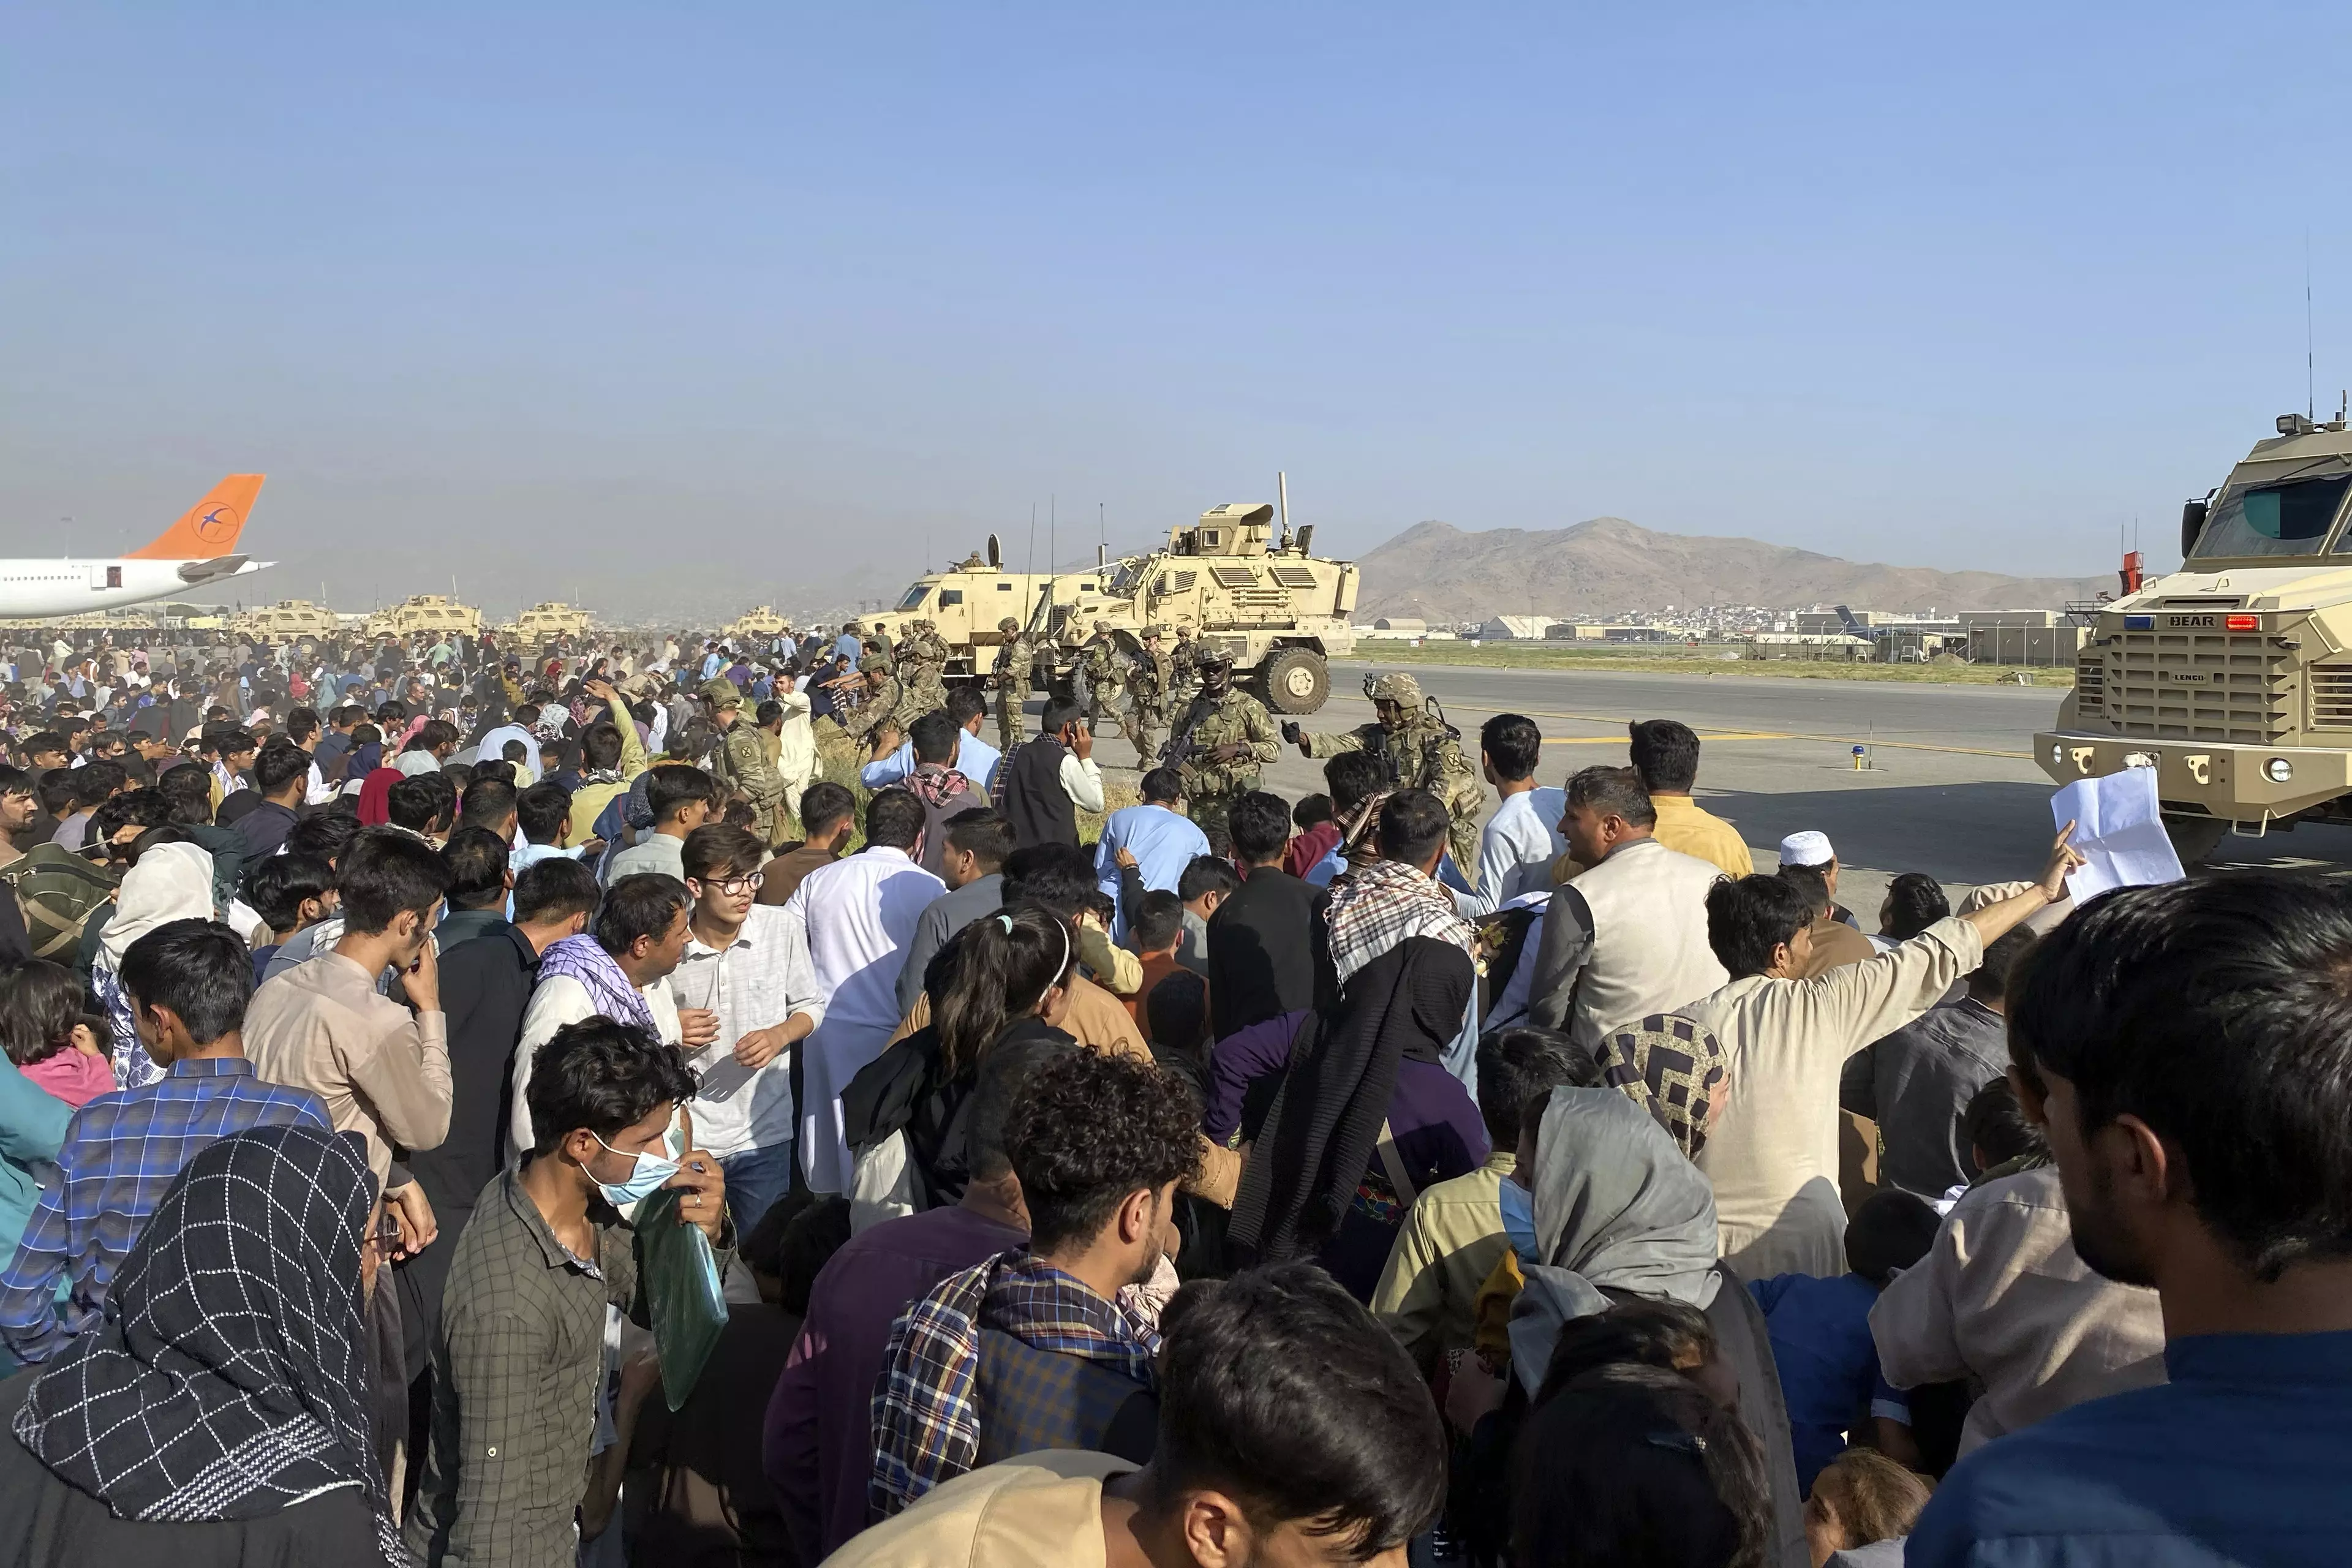 Citizens have made desperate attempts to flee Afghanistan.